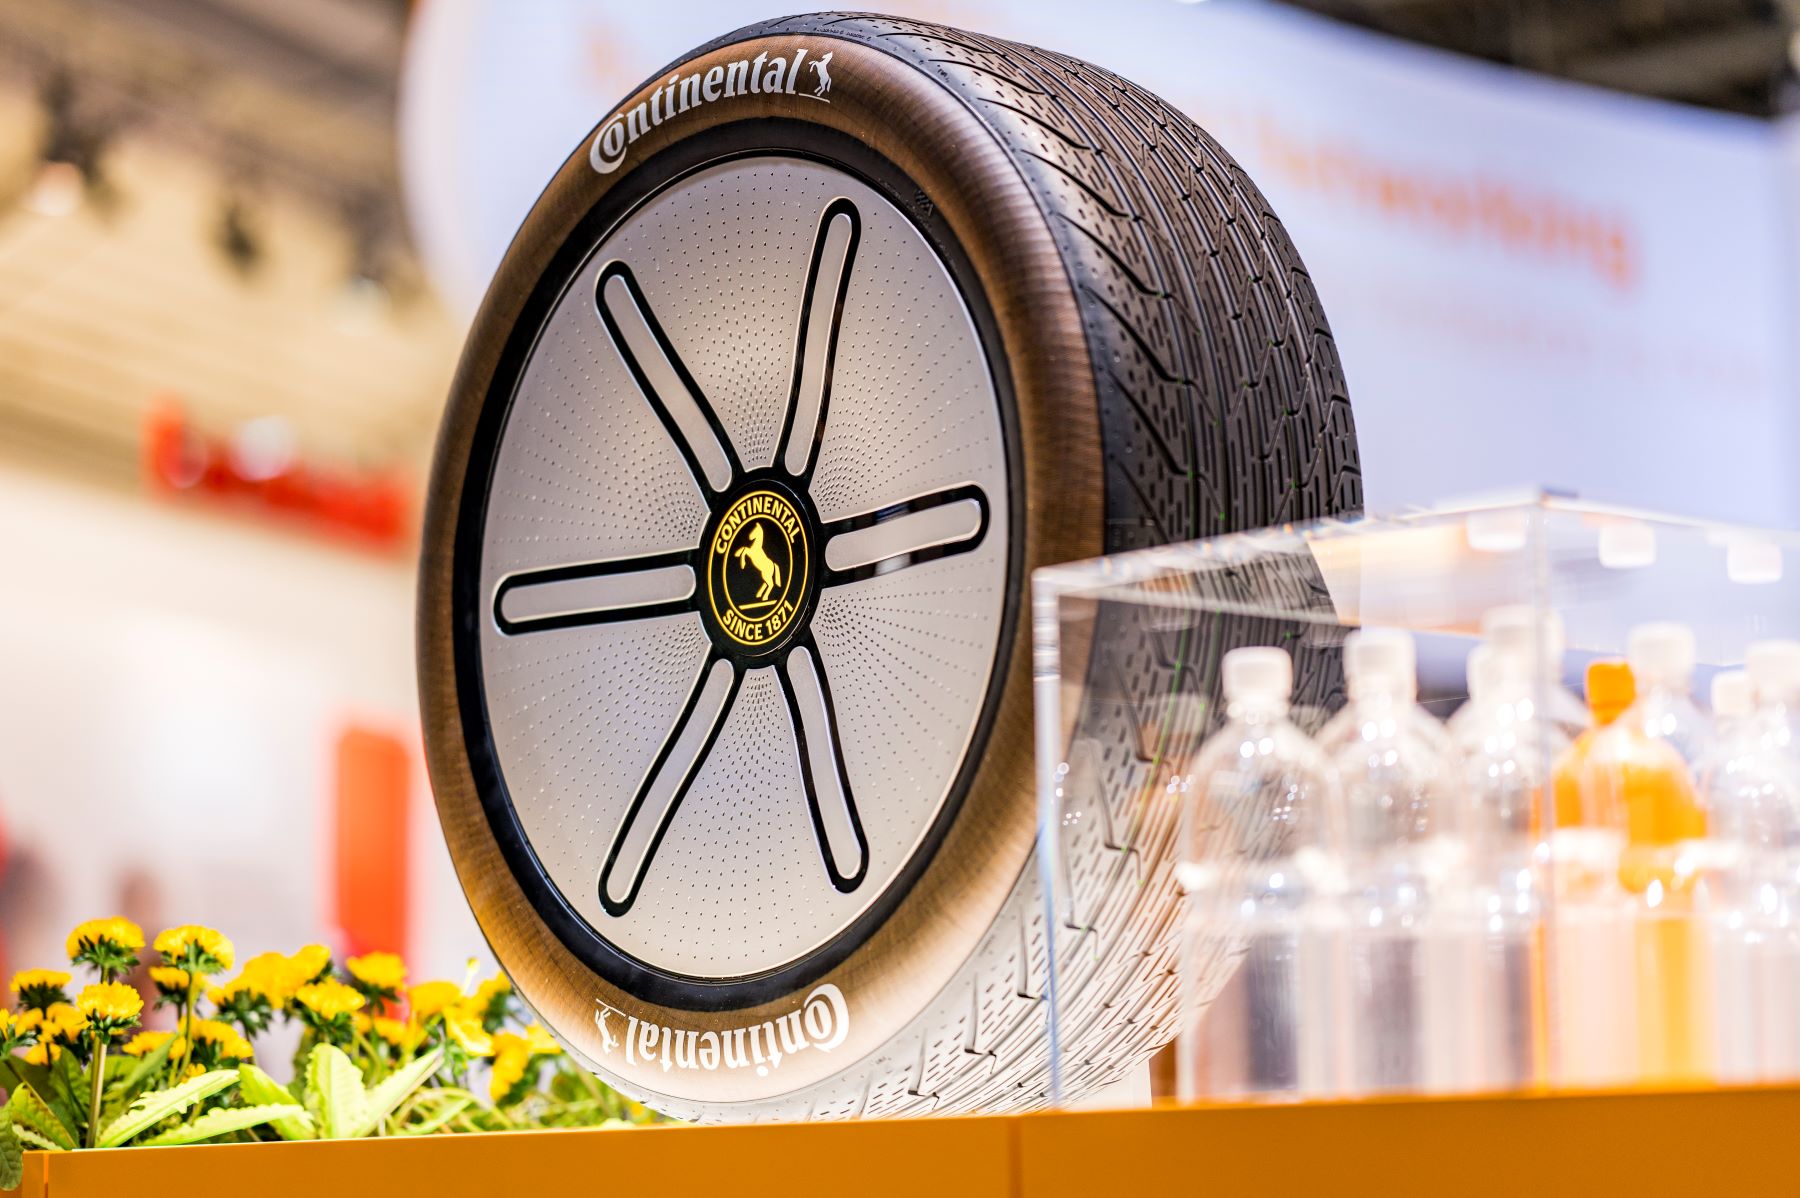 The Continental 'Conti GreenConcept' sustainable tire concept debut at Messe Muenchen in Munich, Germany